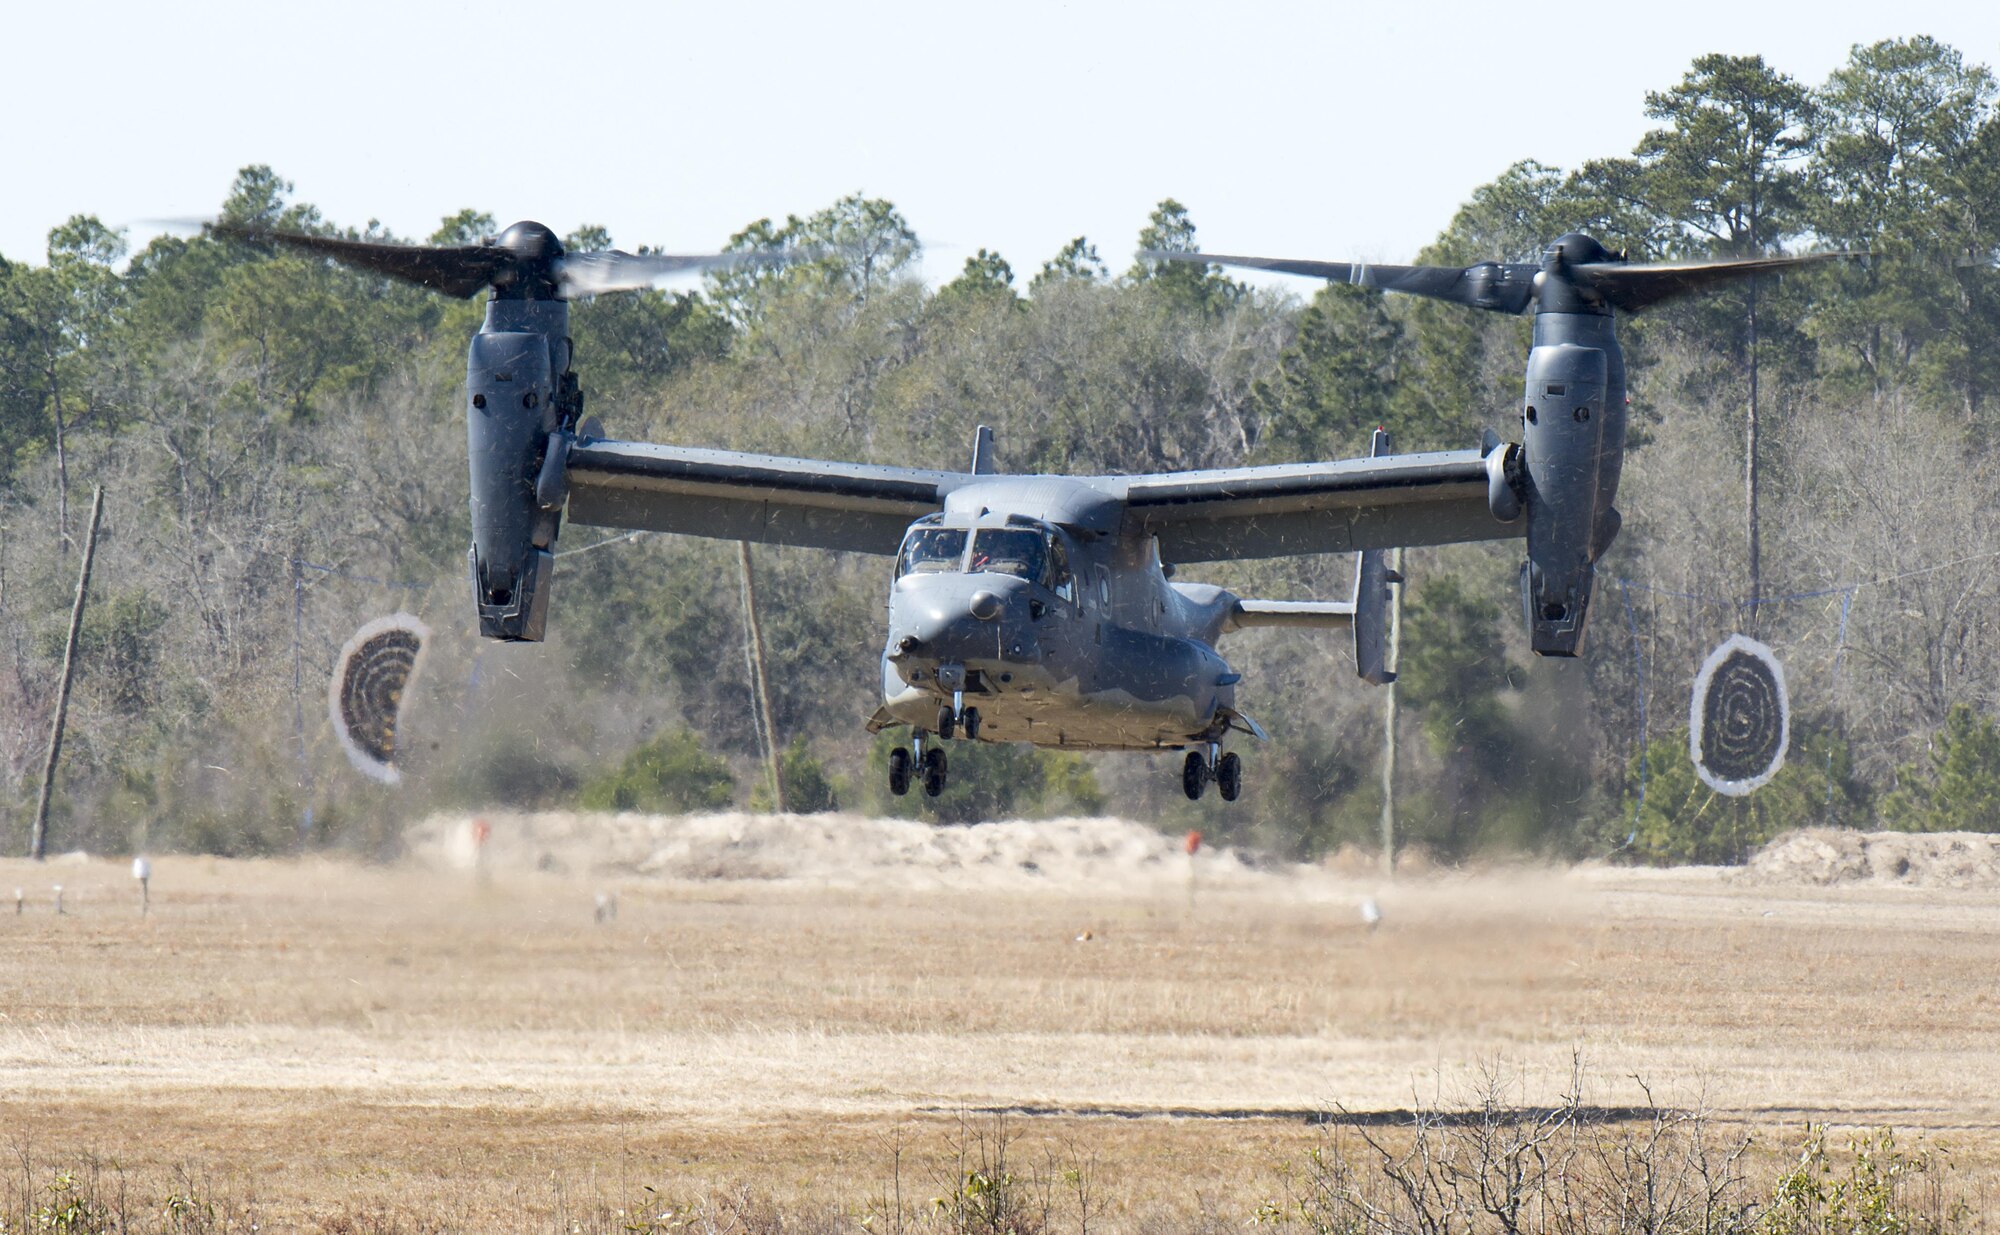 A CV-22 Osprey comes in for a landing on Grand Bay Bombing and Gunnery Range at Moody Air Force Base, Ga., Feb. 18, 2016. Multiple U.S. Air Force aircraft within Air Combat Command conducted joint combat rescue and aerial training that showcased the aircrafts tactical air and ground maneuvers, as well as its weapons capabilities. (U.S. Air Force photo by Staff Sgt. Brian J. Valencia/Released)